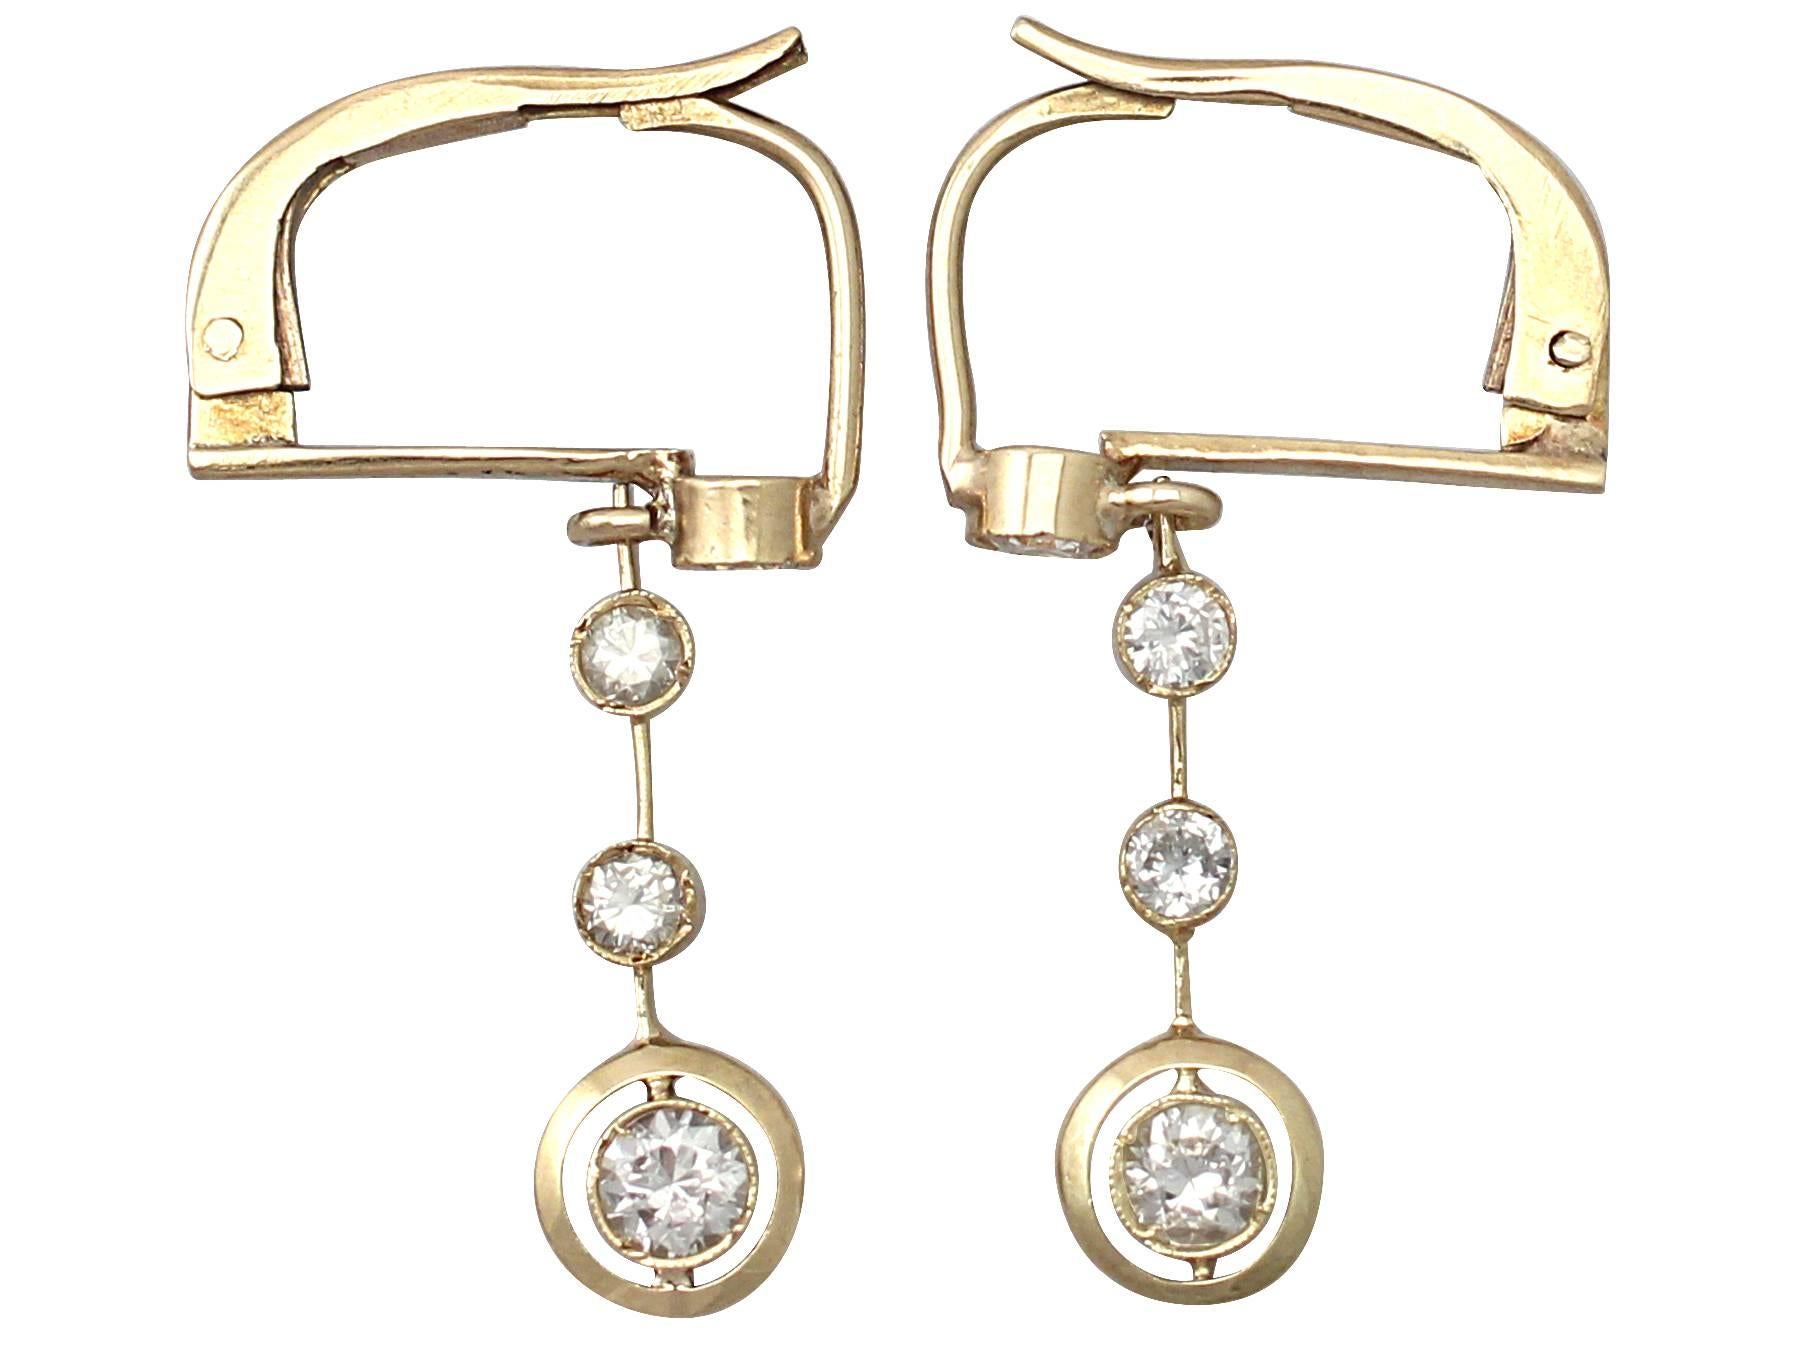 A fine and impressive pair of antique 0.74 carat diamond and 18 karat yellow gold drop earrings; part of our antique jewelry and estate jewelry collections

These fine and impressive antique diamond drop earrings have been crafted in 18k yellow